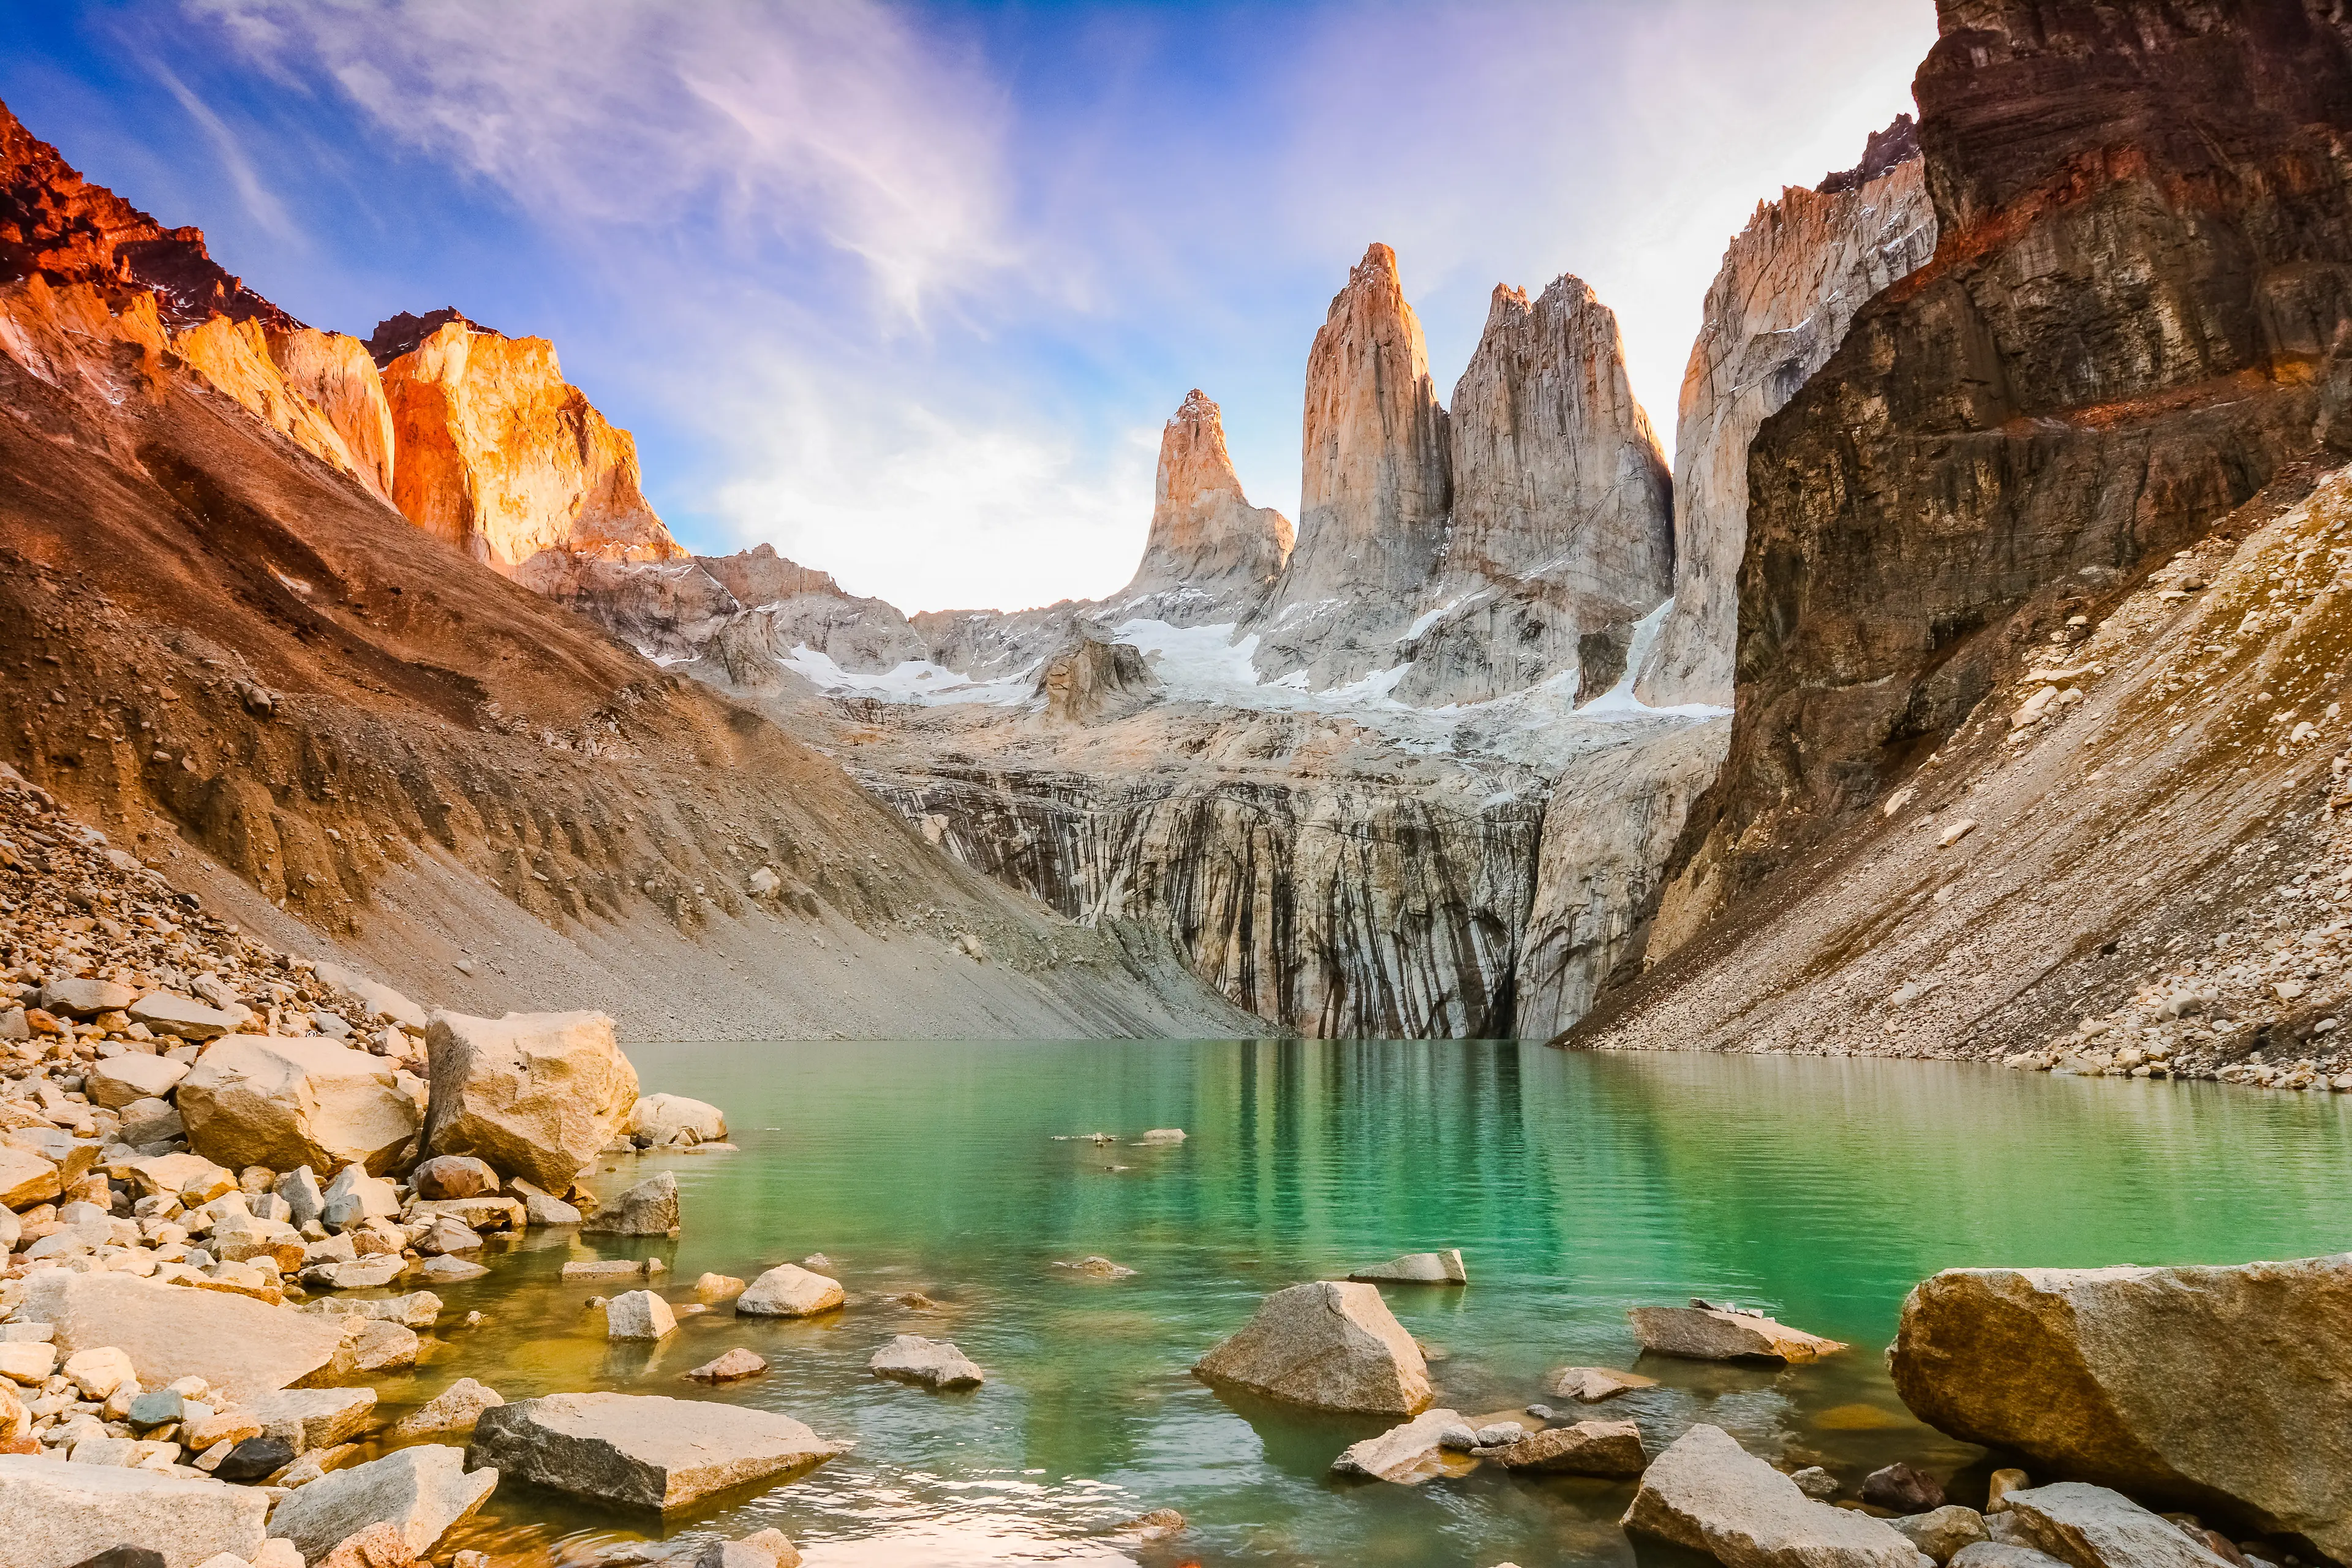 4-Day Local Family Experience in Chilean Patagonia: Sightseeing & Relaxation